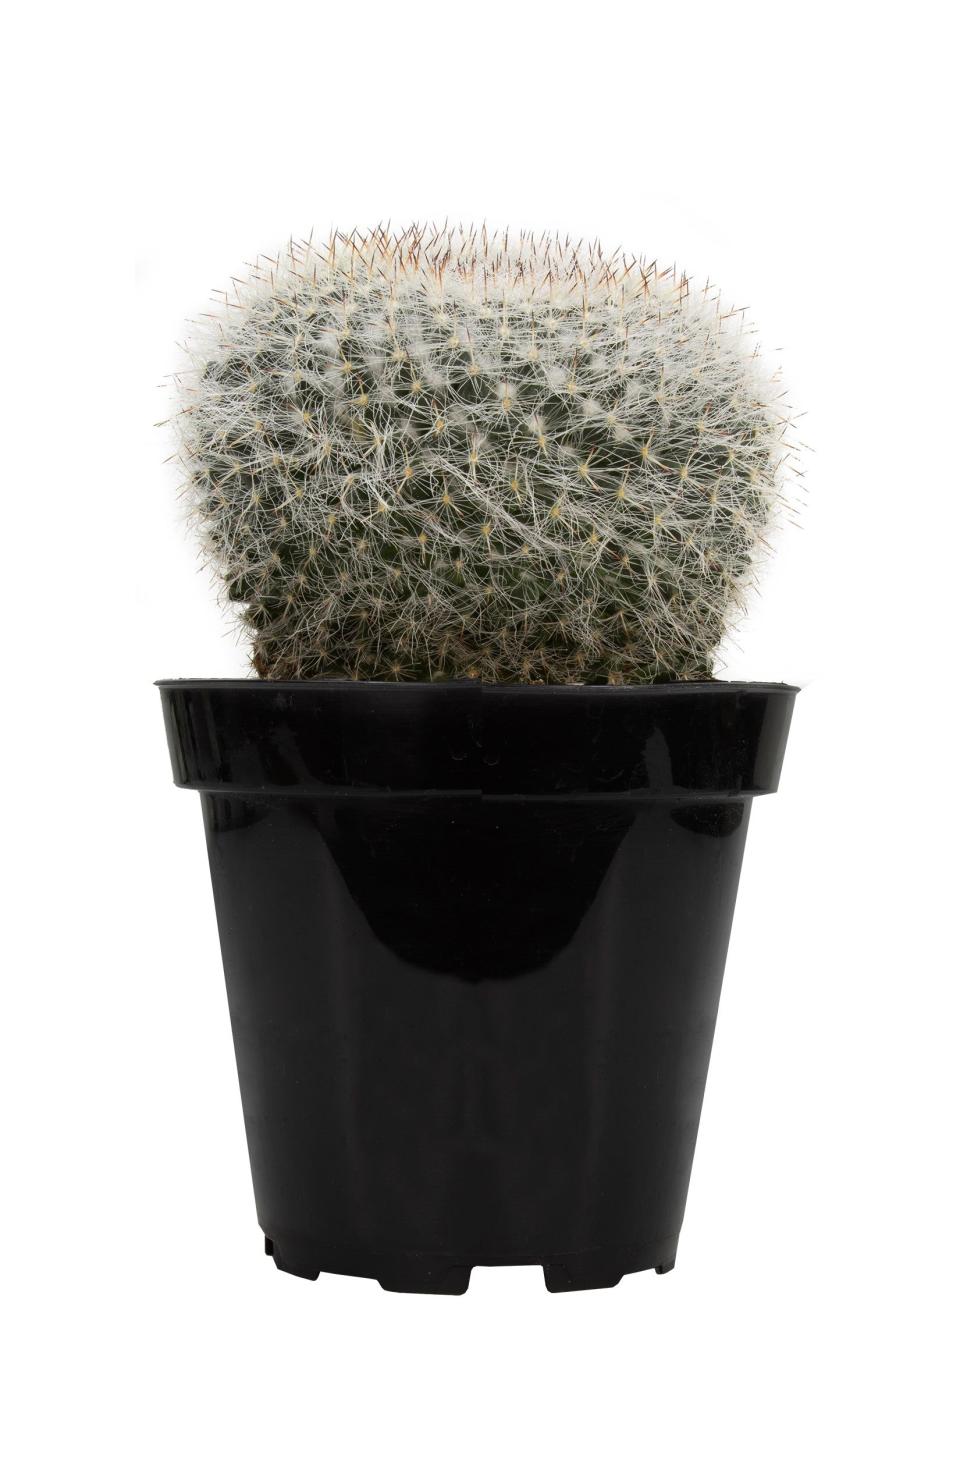 2) Old Lady Cactus